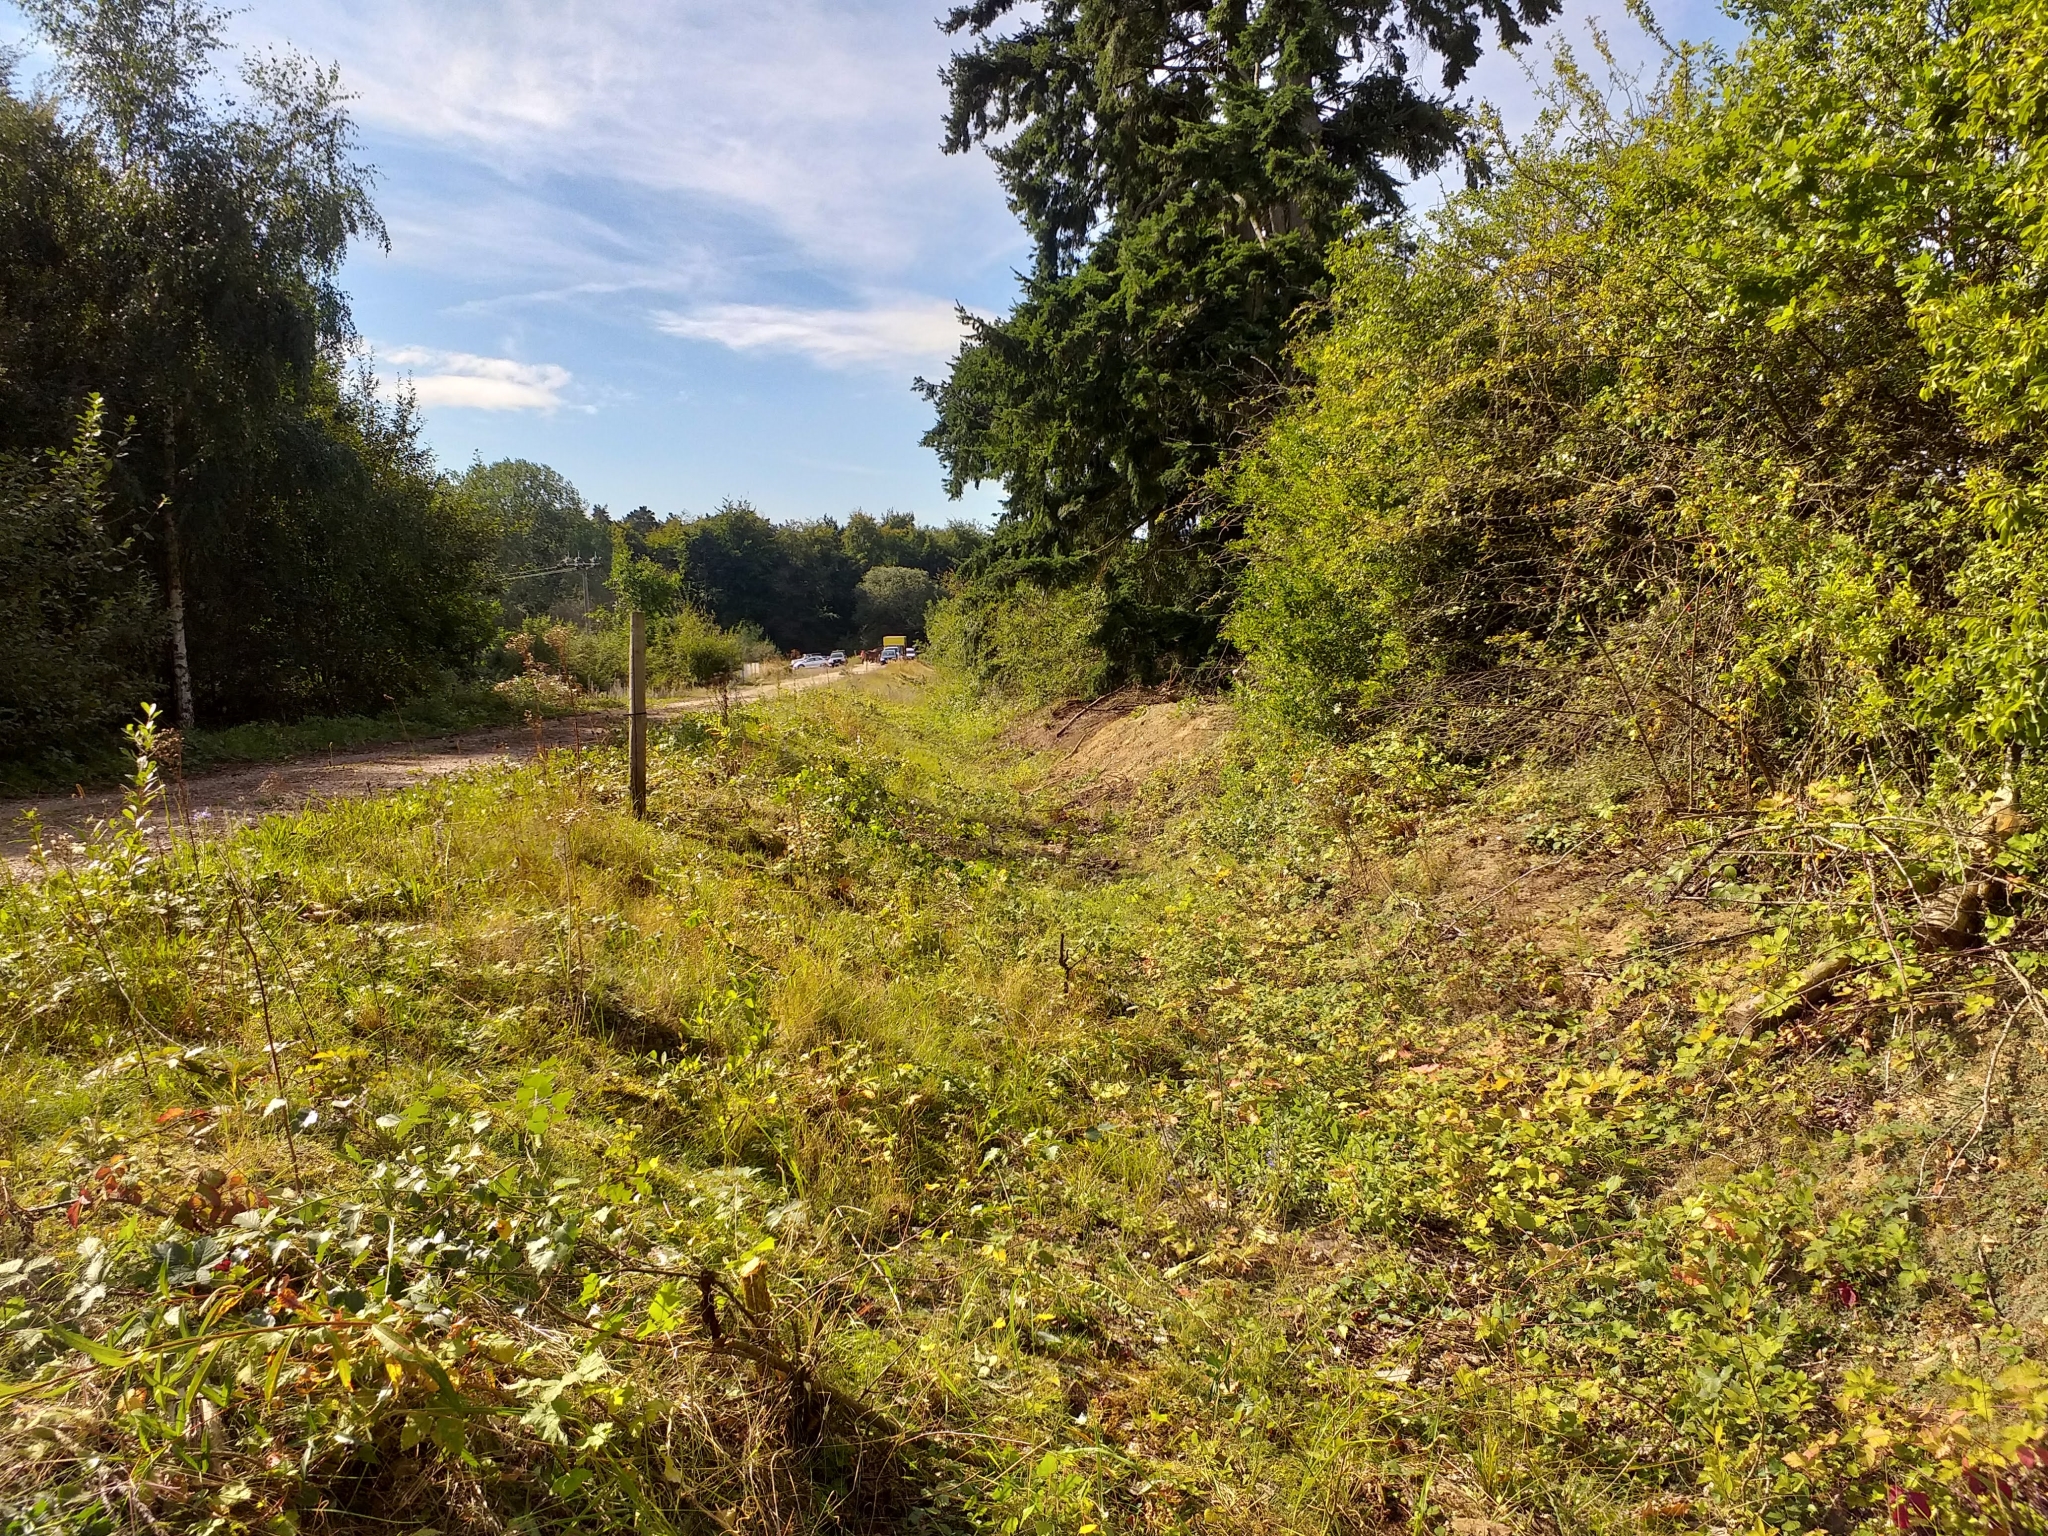 A photo from the FoTF Conservation Event - September 2019 - Scrub Clearance at Cranwich Camp : Scrub in a ditch